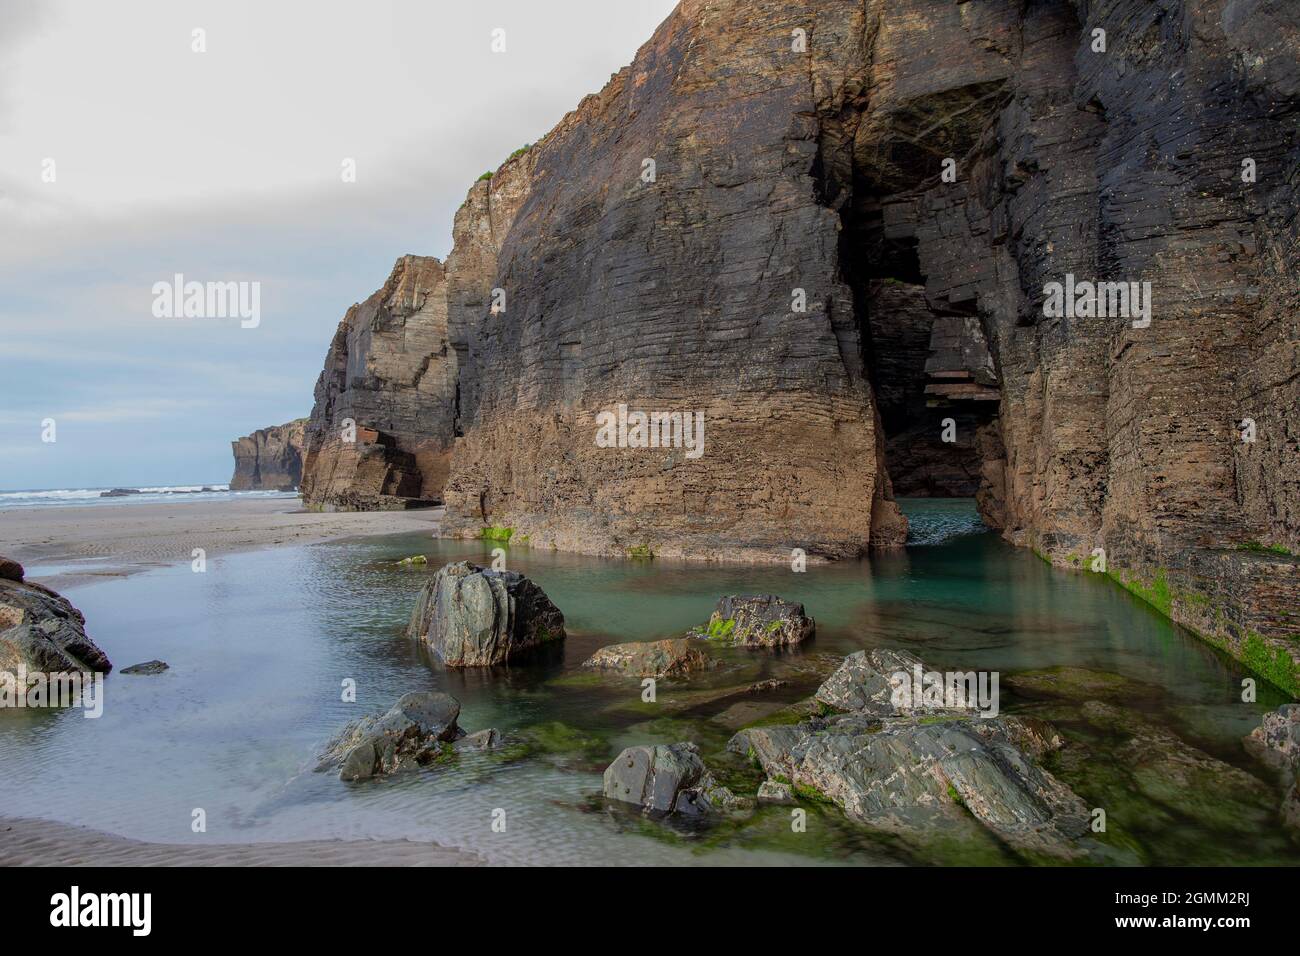 The beautiful rocks formations of the Cathedrals beach. Lugo, Galicia, Spain Stock Photo